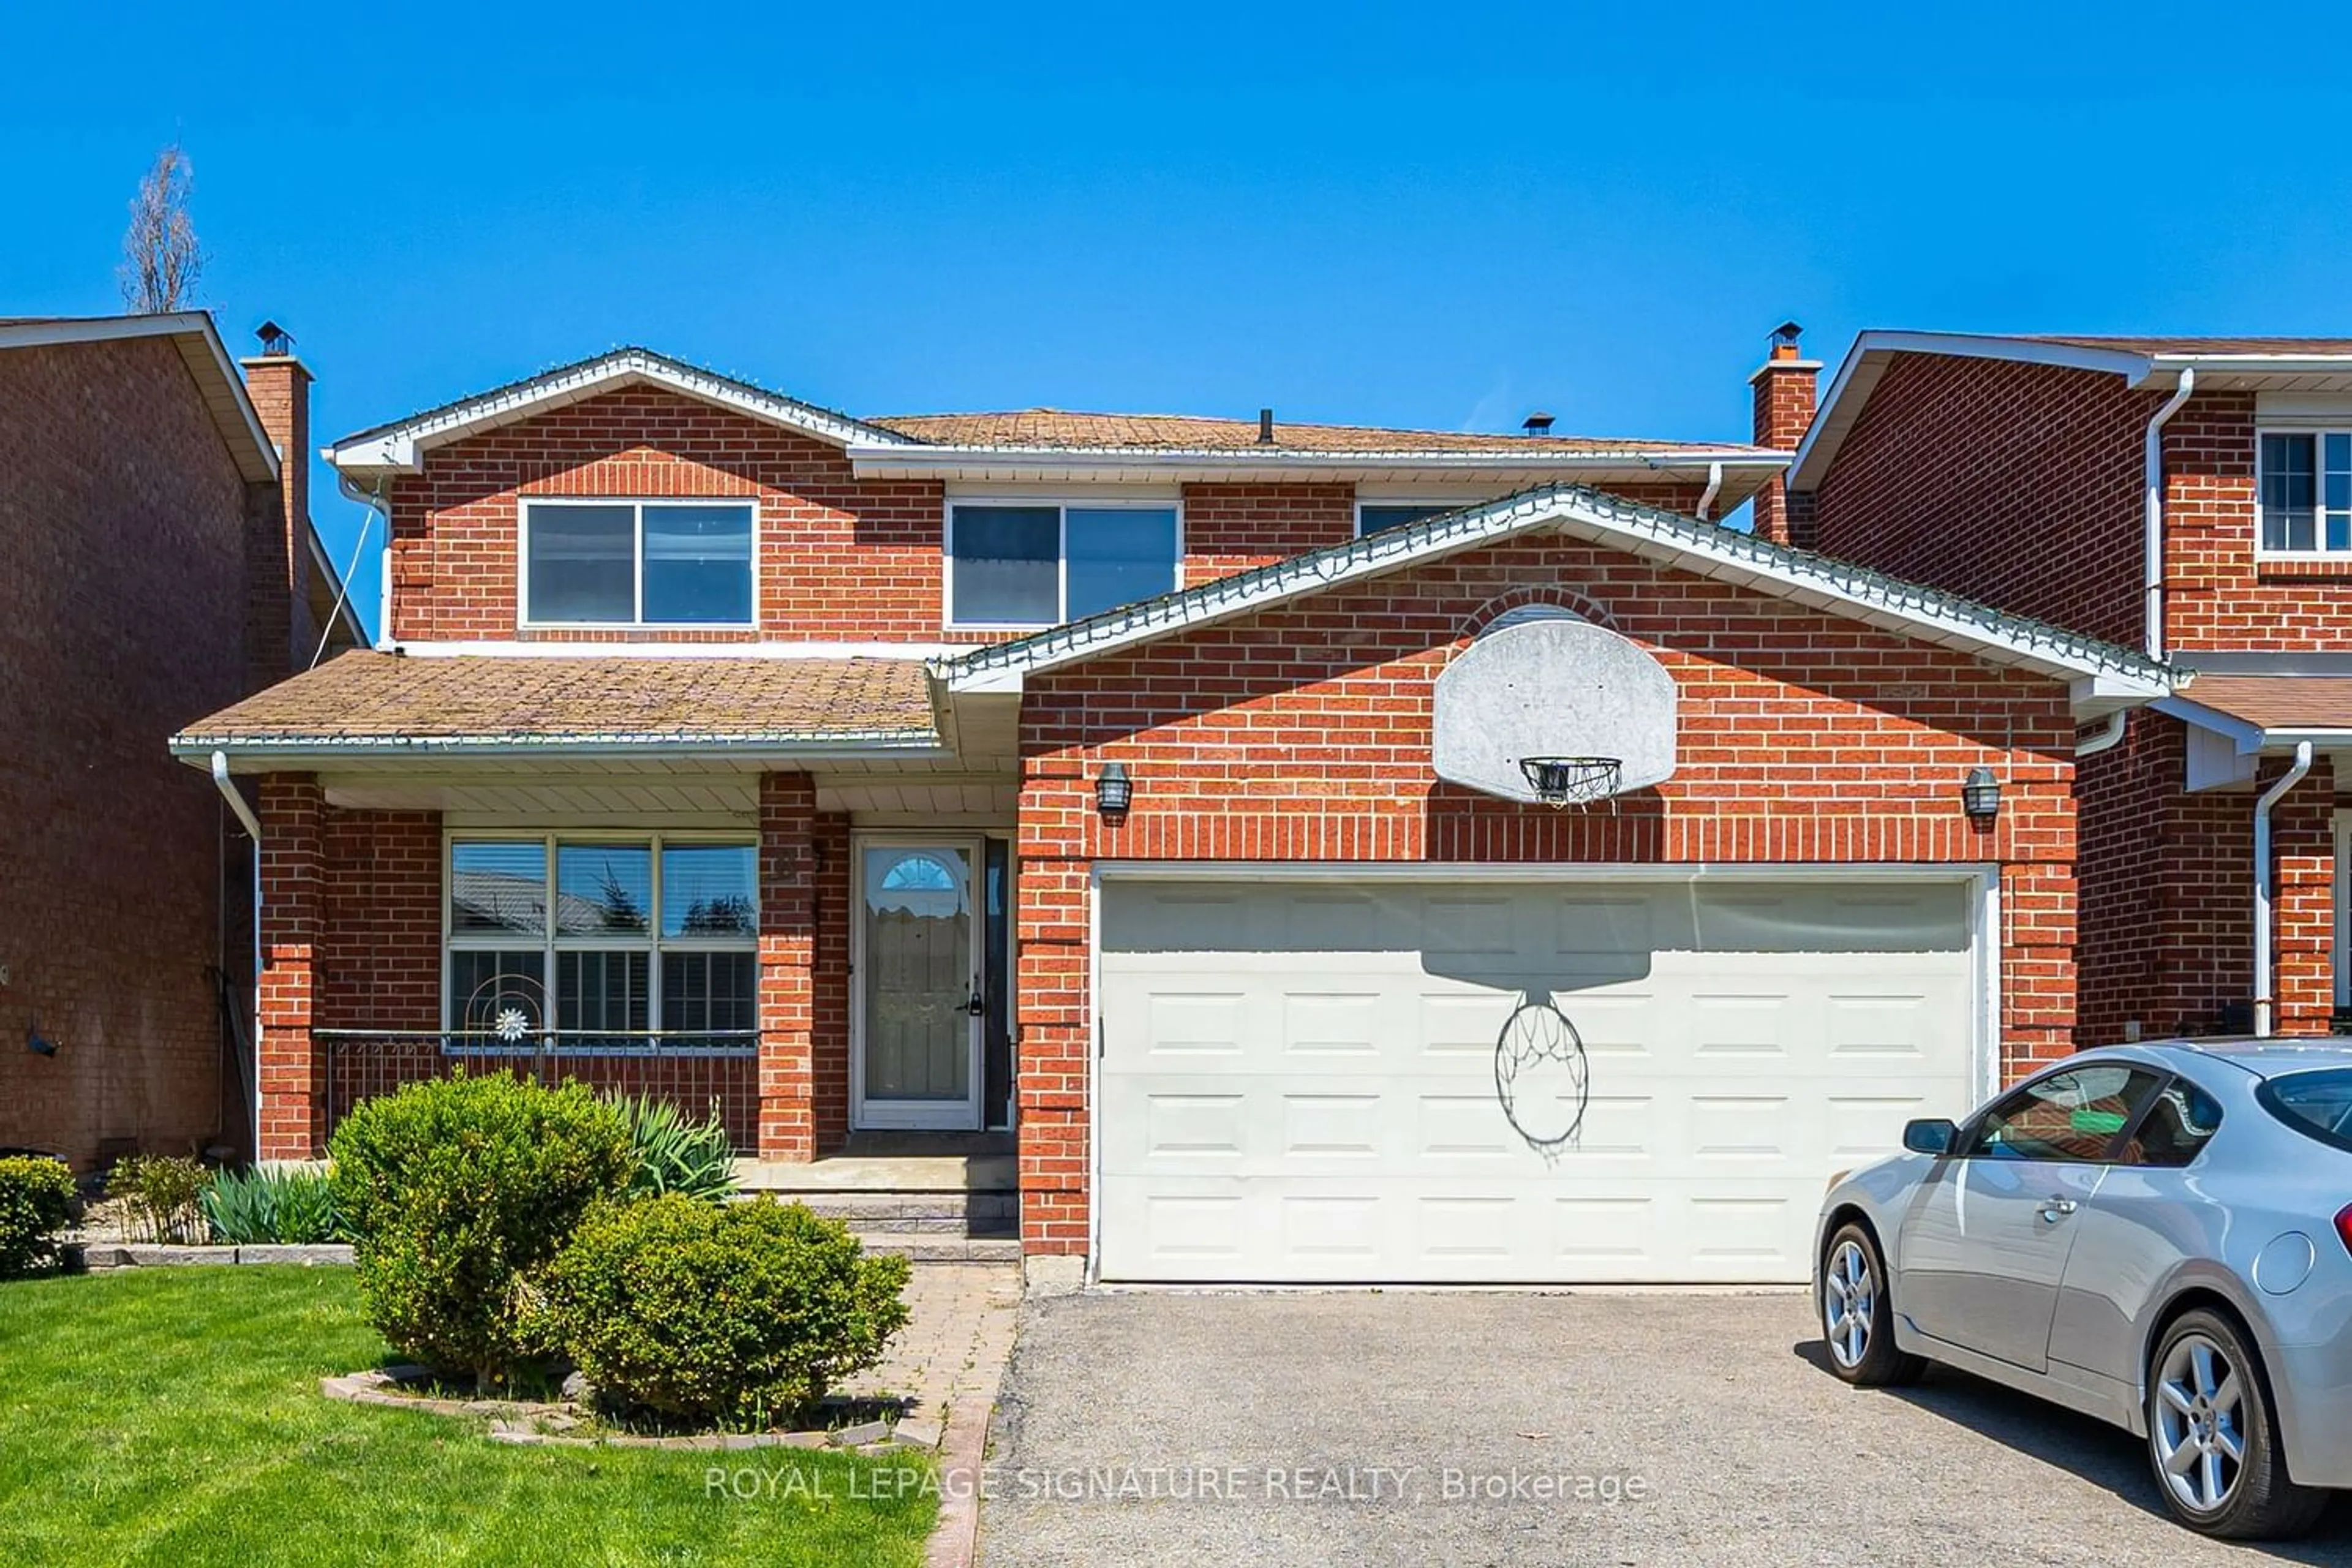 Home with brick exterior material for 8 Romney Crt, Brampton Ontario L6Z 3S2